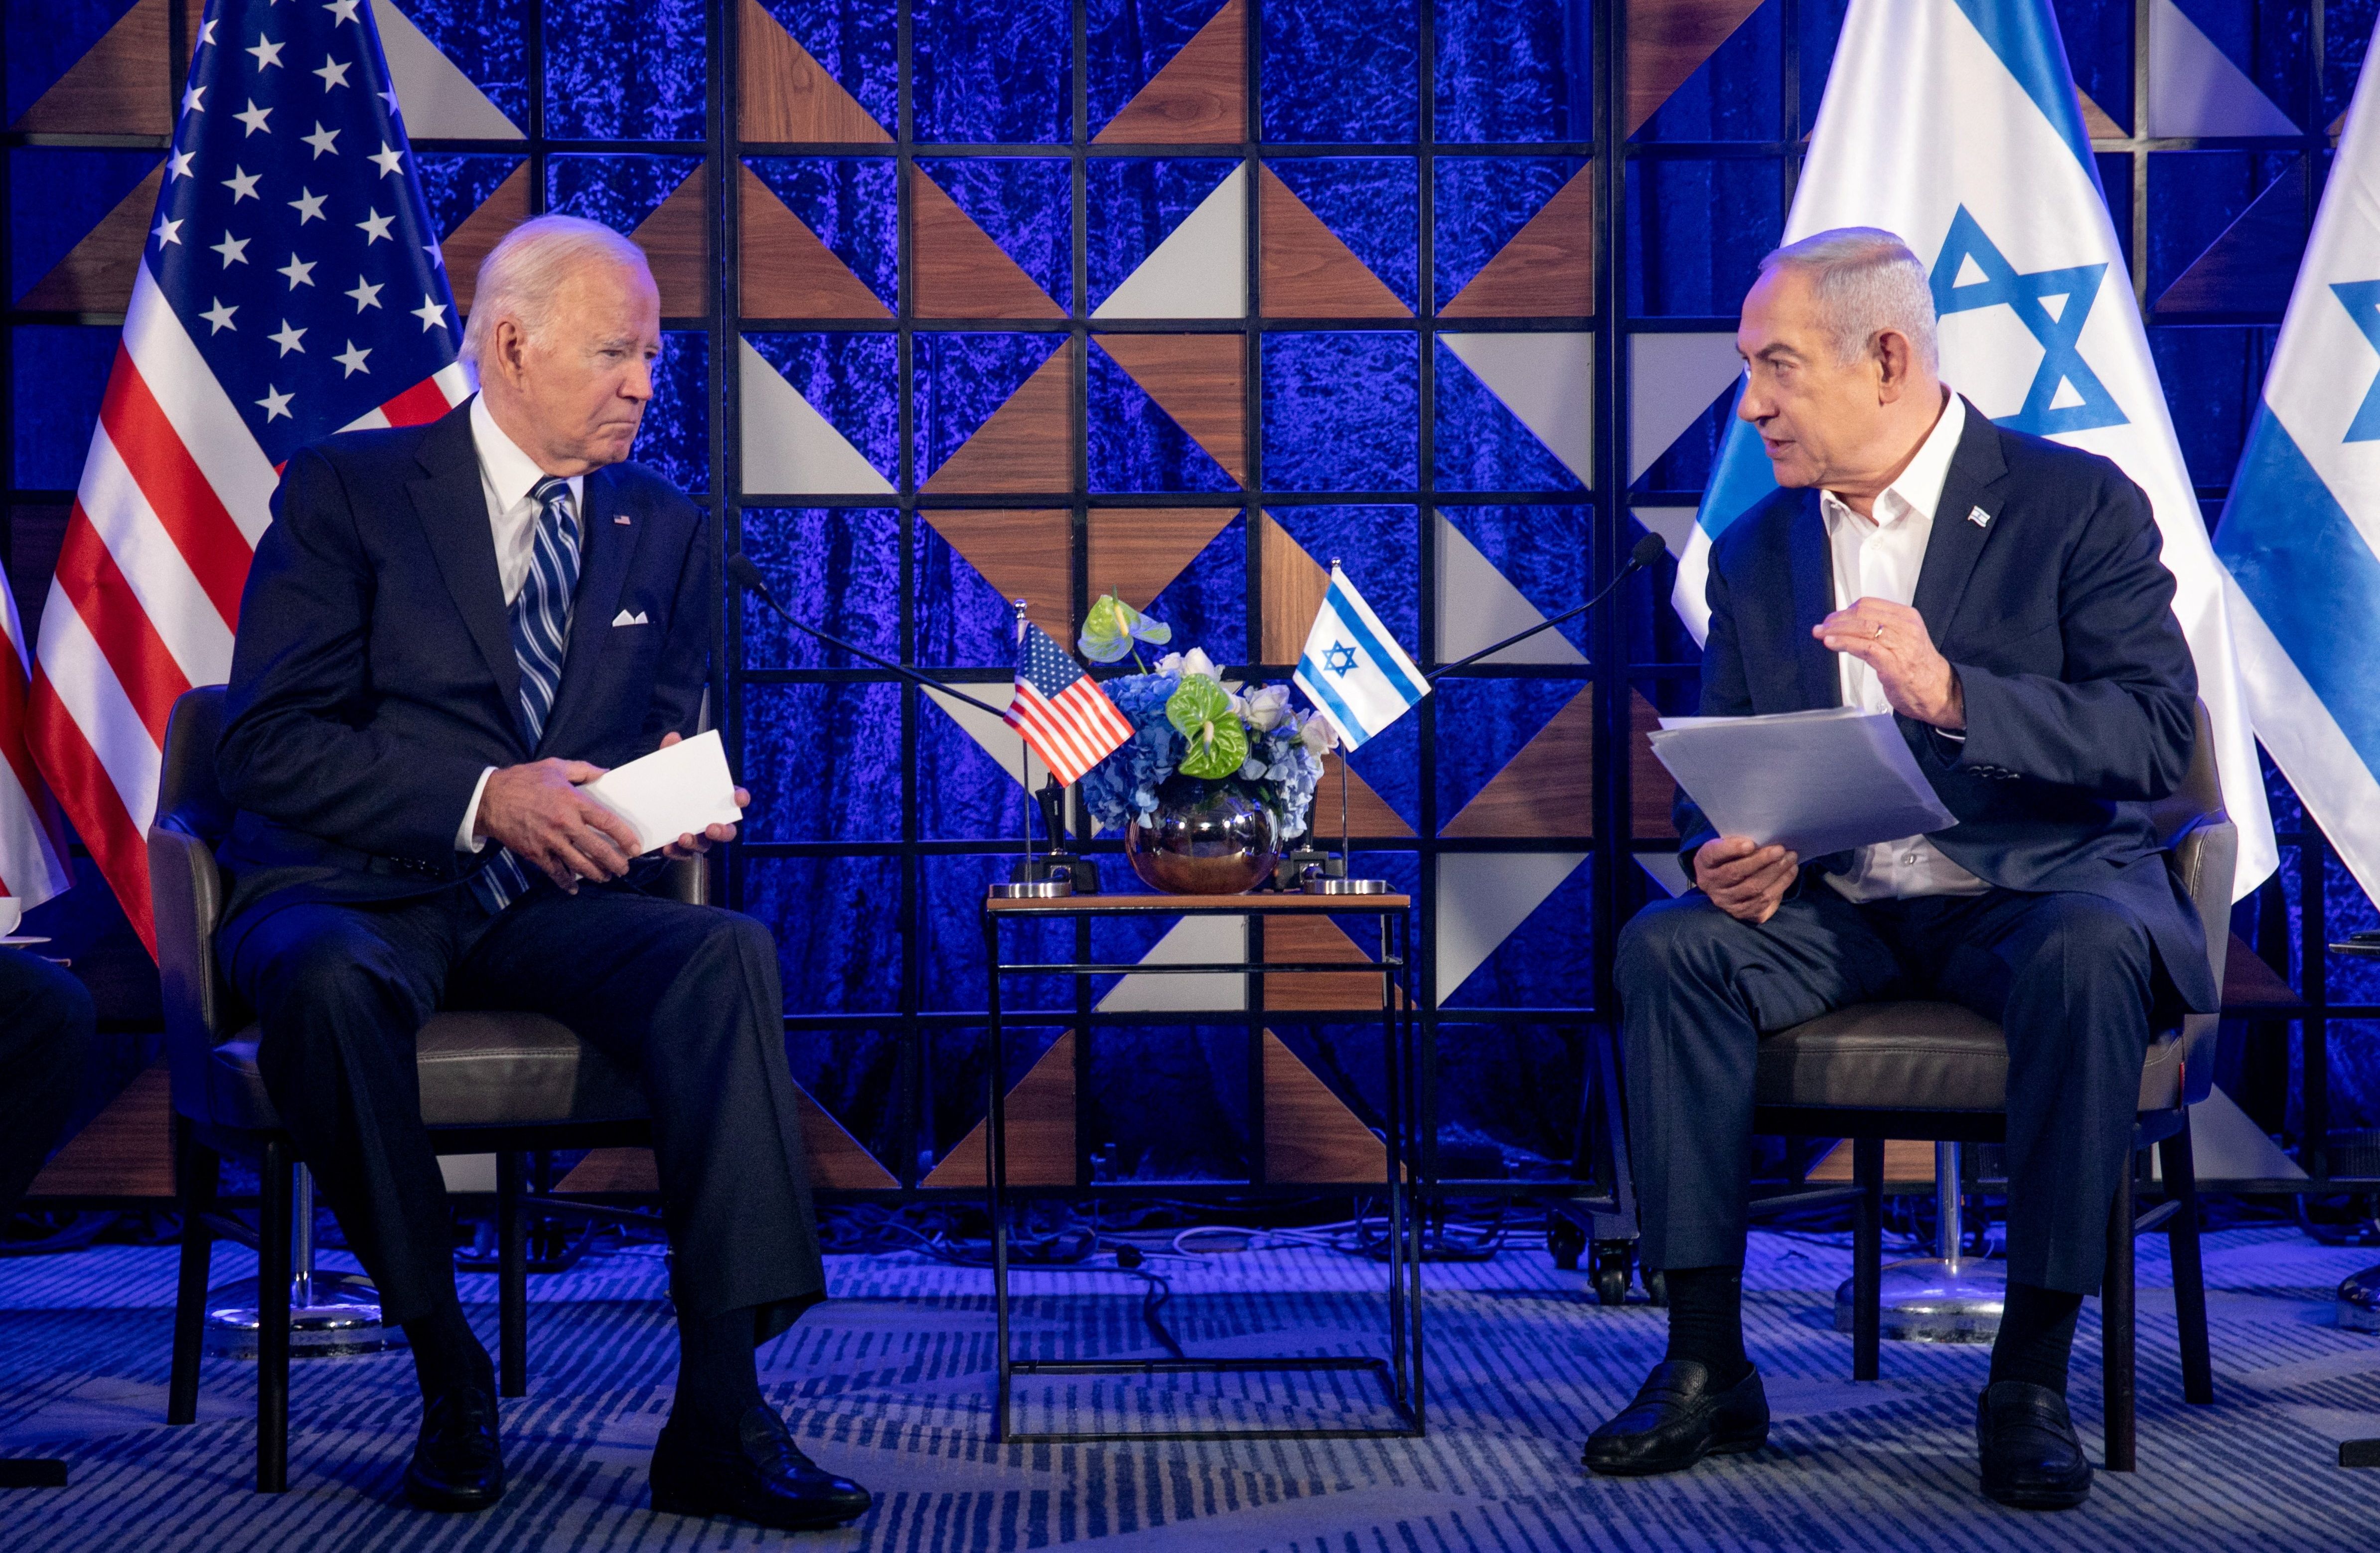 Biden says he's pushing a 2-state solution. Let's put him to the test.